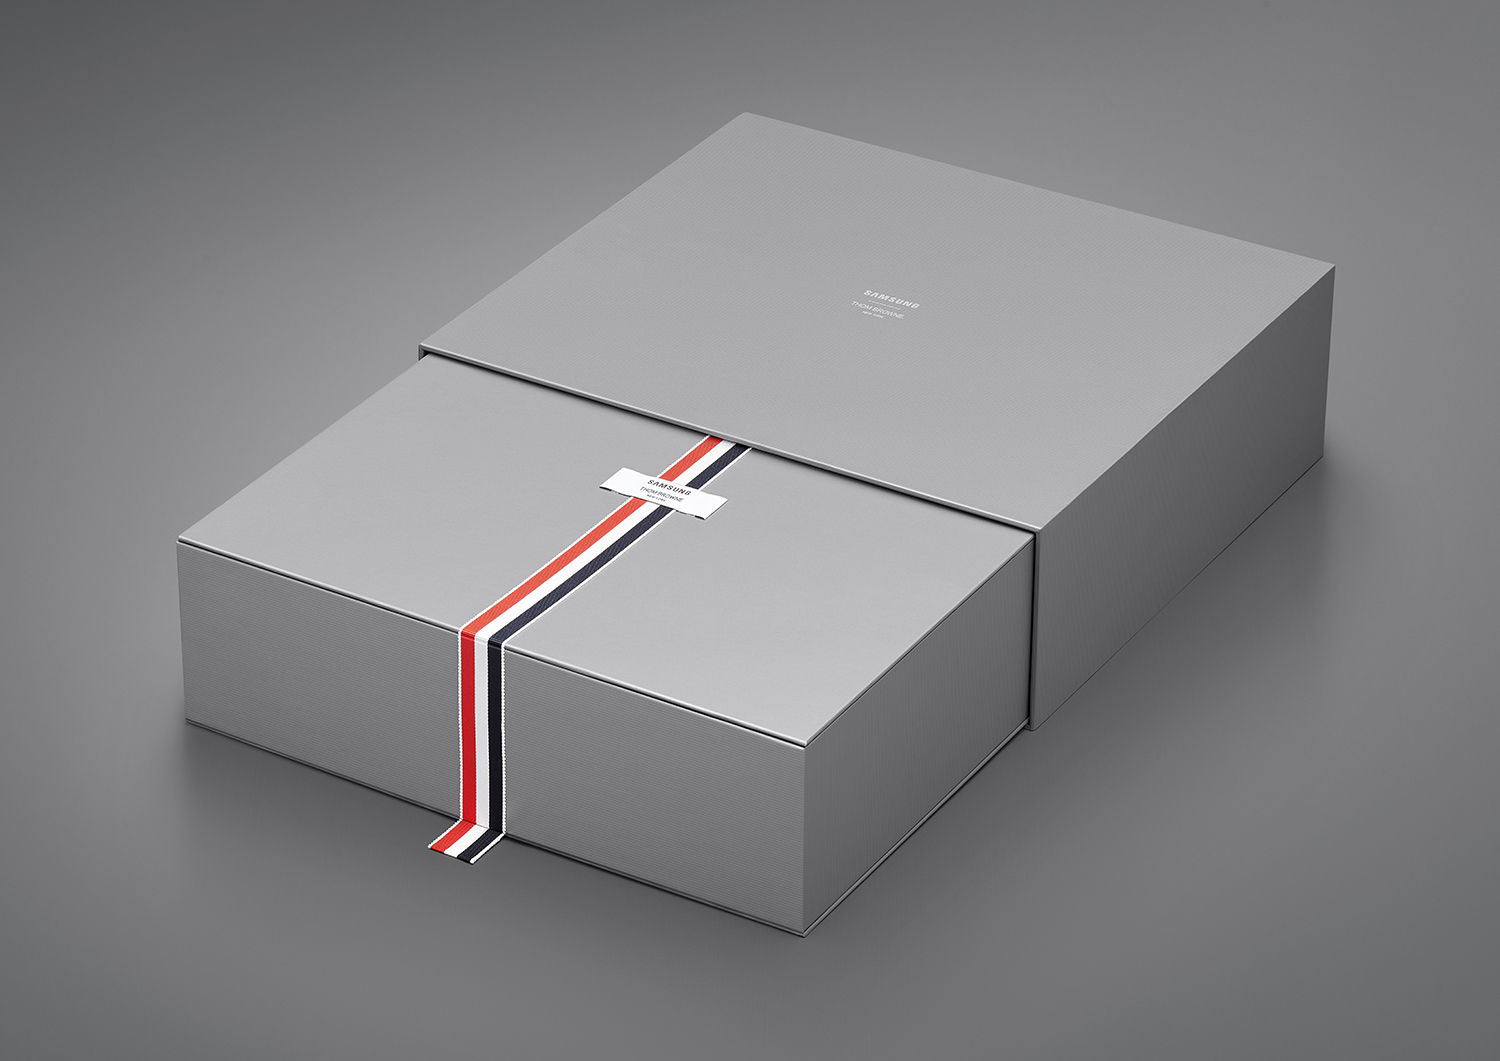 The box for the Galaxy Z Fold2 Thom Browne Edition.